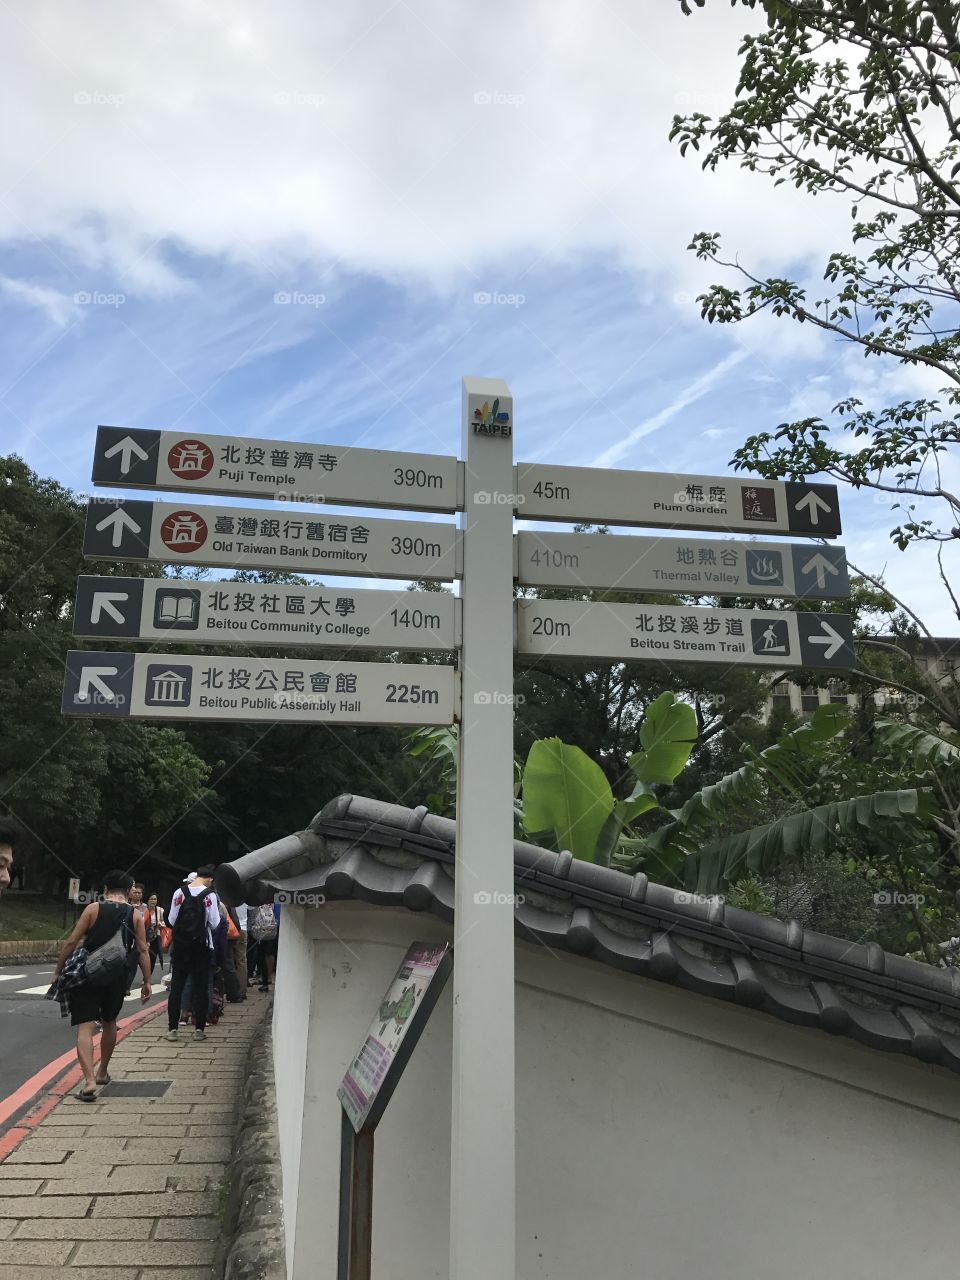 Hot spring valley, outdoor, nature, trees, hot spring, Chinese hot spring, stone, traditional hot spring, signs, directions, Taiwan 